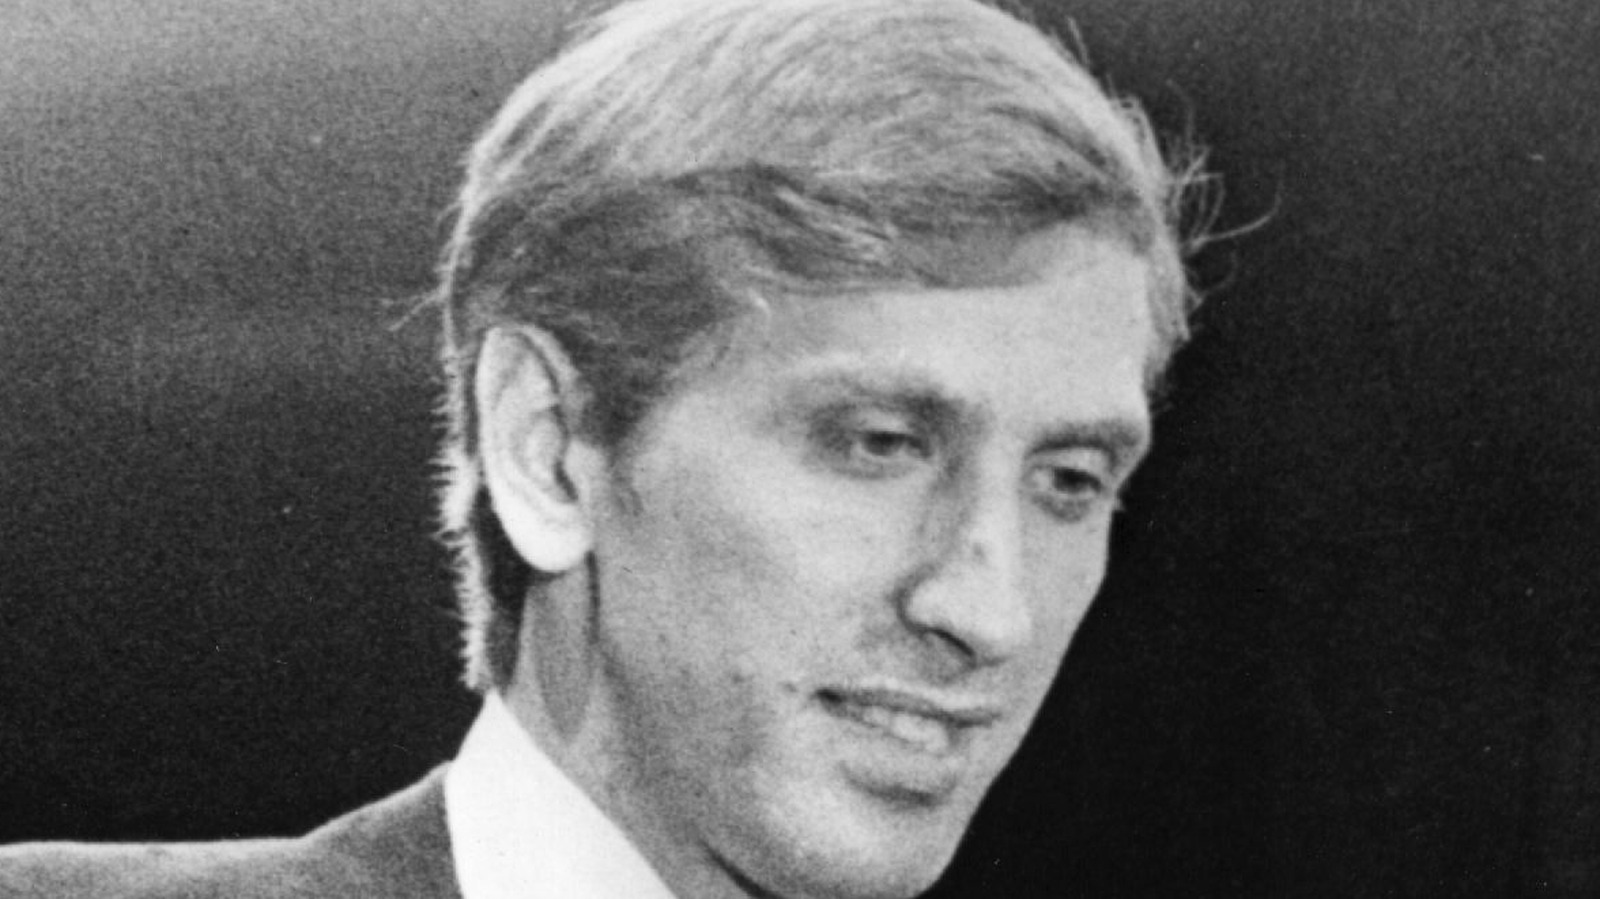 Bobby Fischer, Chess Master, Dies at 64 - The New York Times